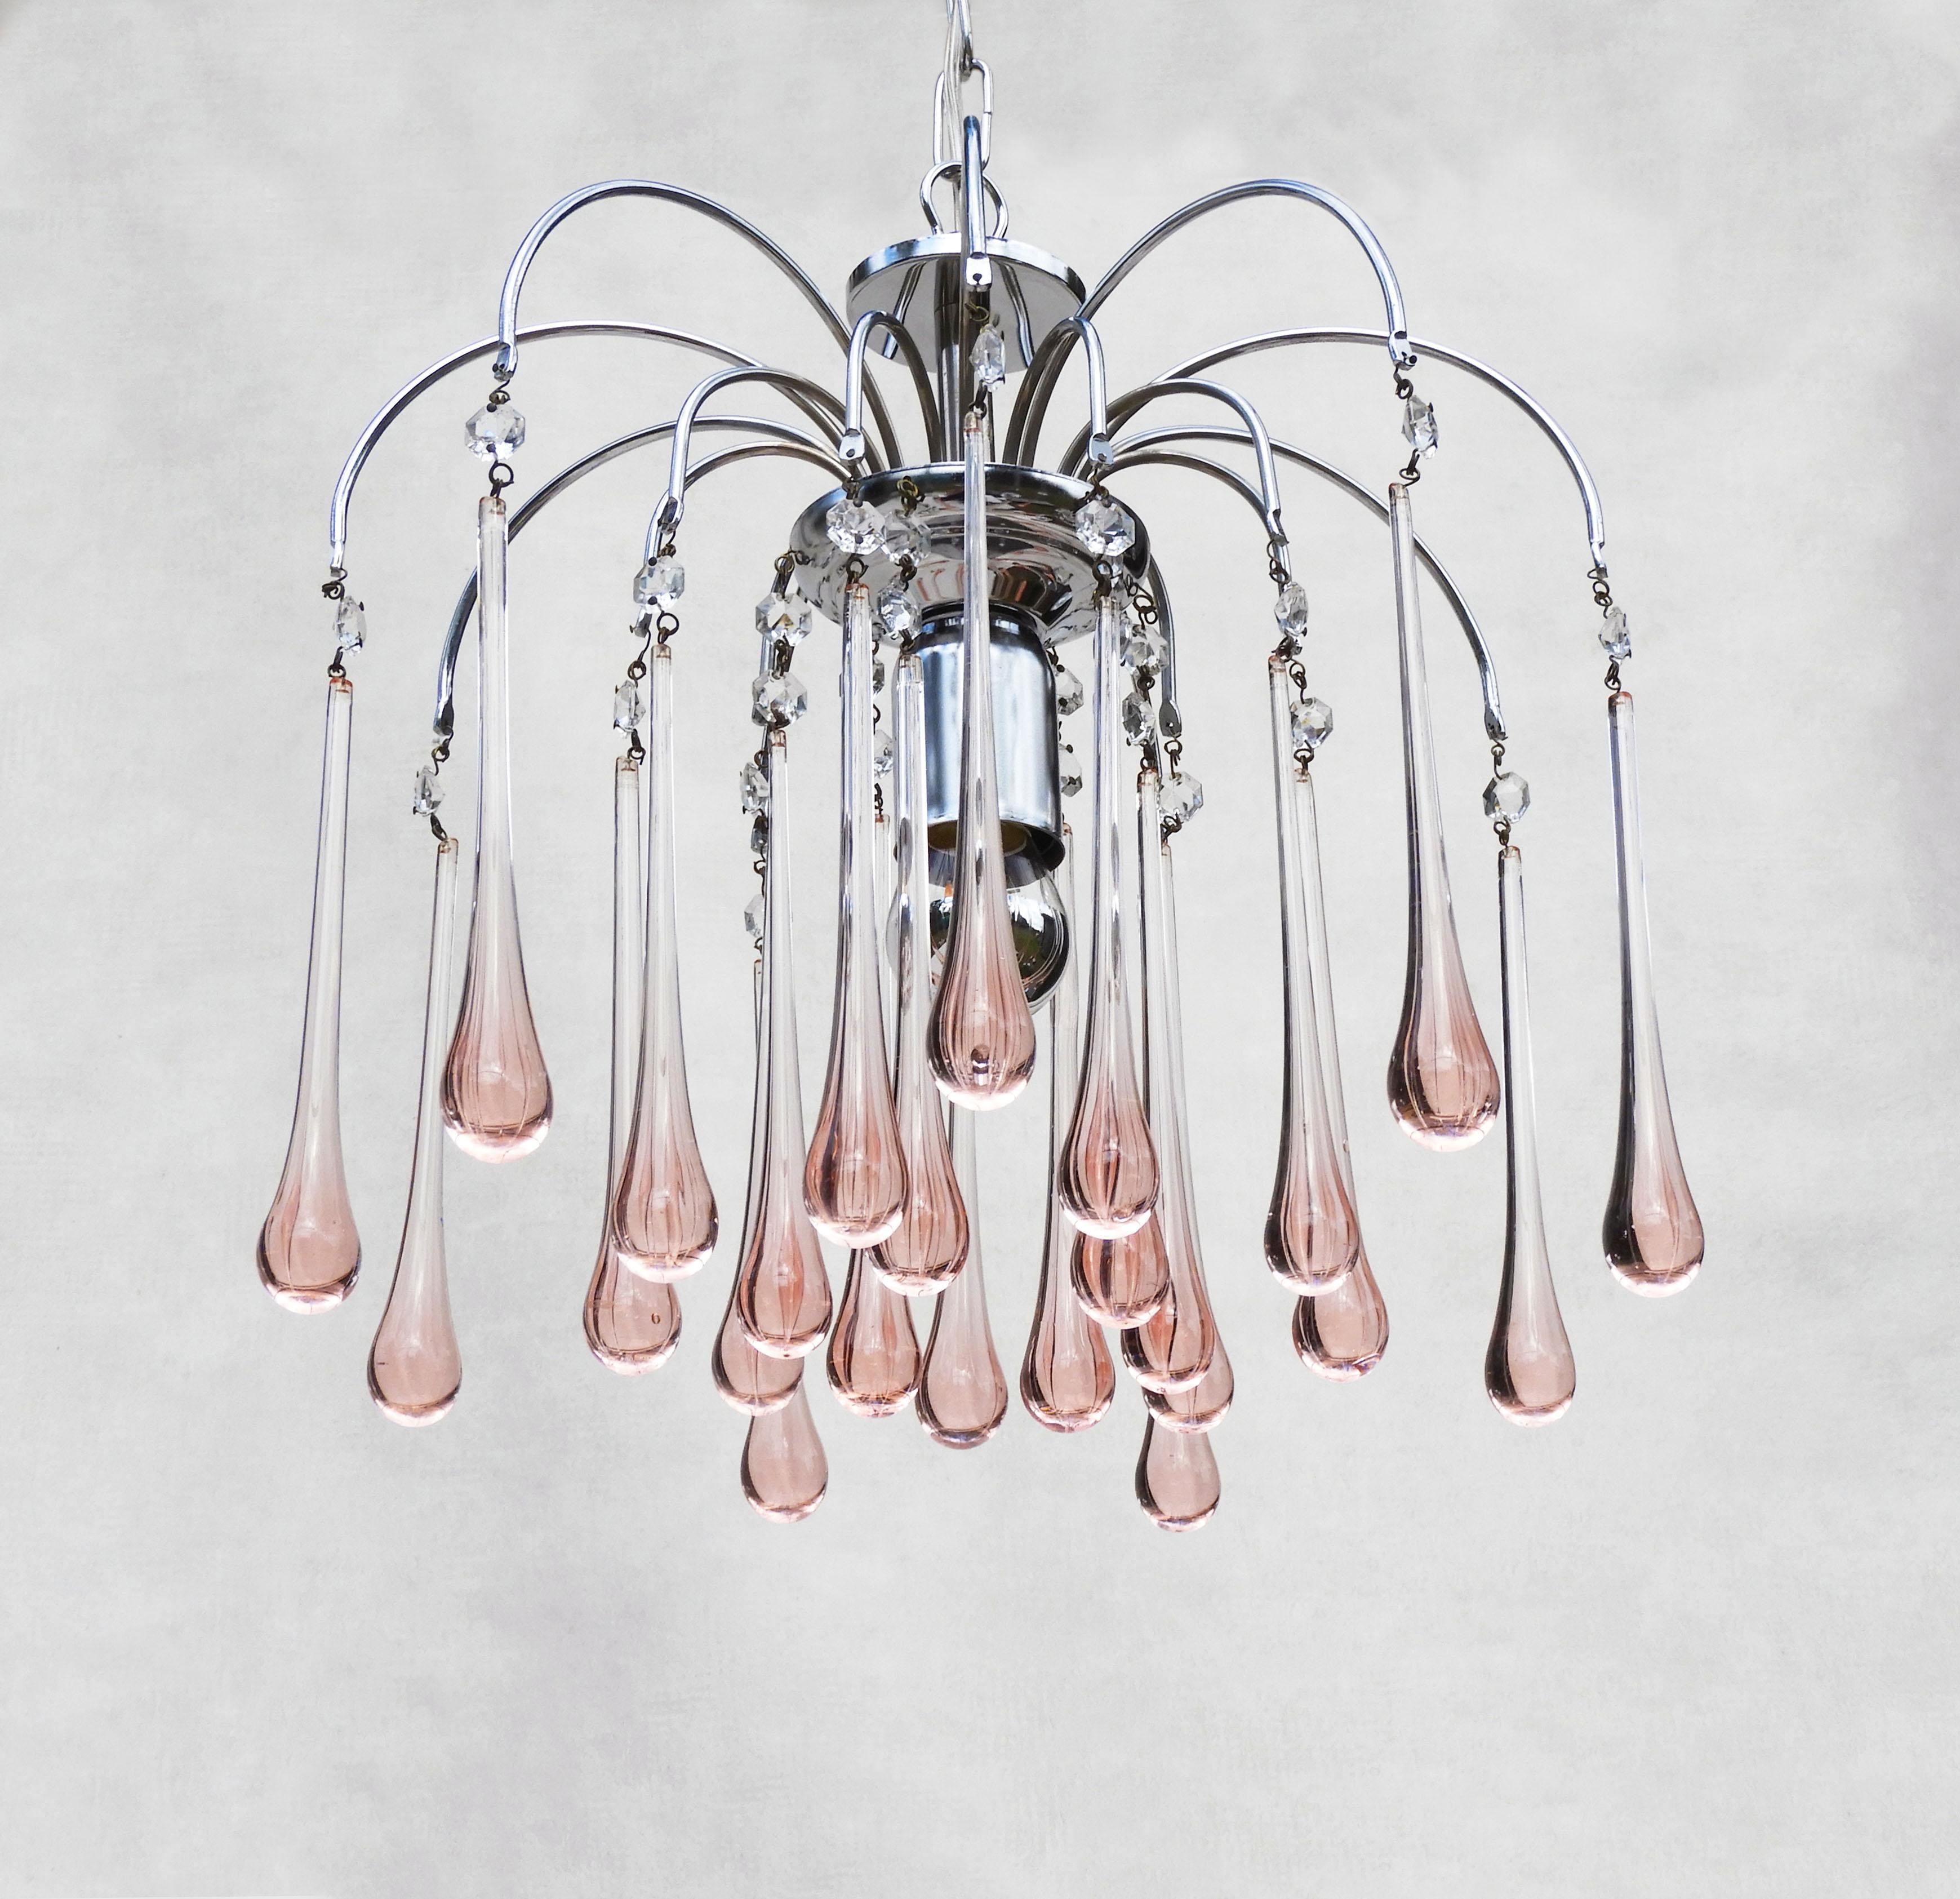 Stunning Paulo Venini style waterfall pendant chandelier.
Beautiful Murano glass cascade pendant light, 24 Pink ‘teardrop’ crystals on a three-tier chrome frame.
In great vintage condition with good patina and no losses to glass. Completely